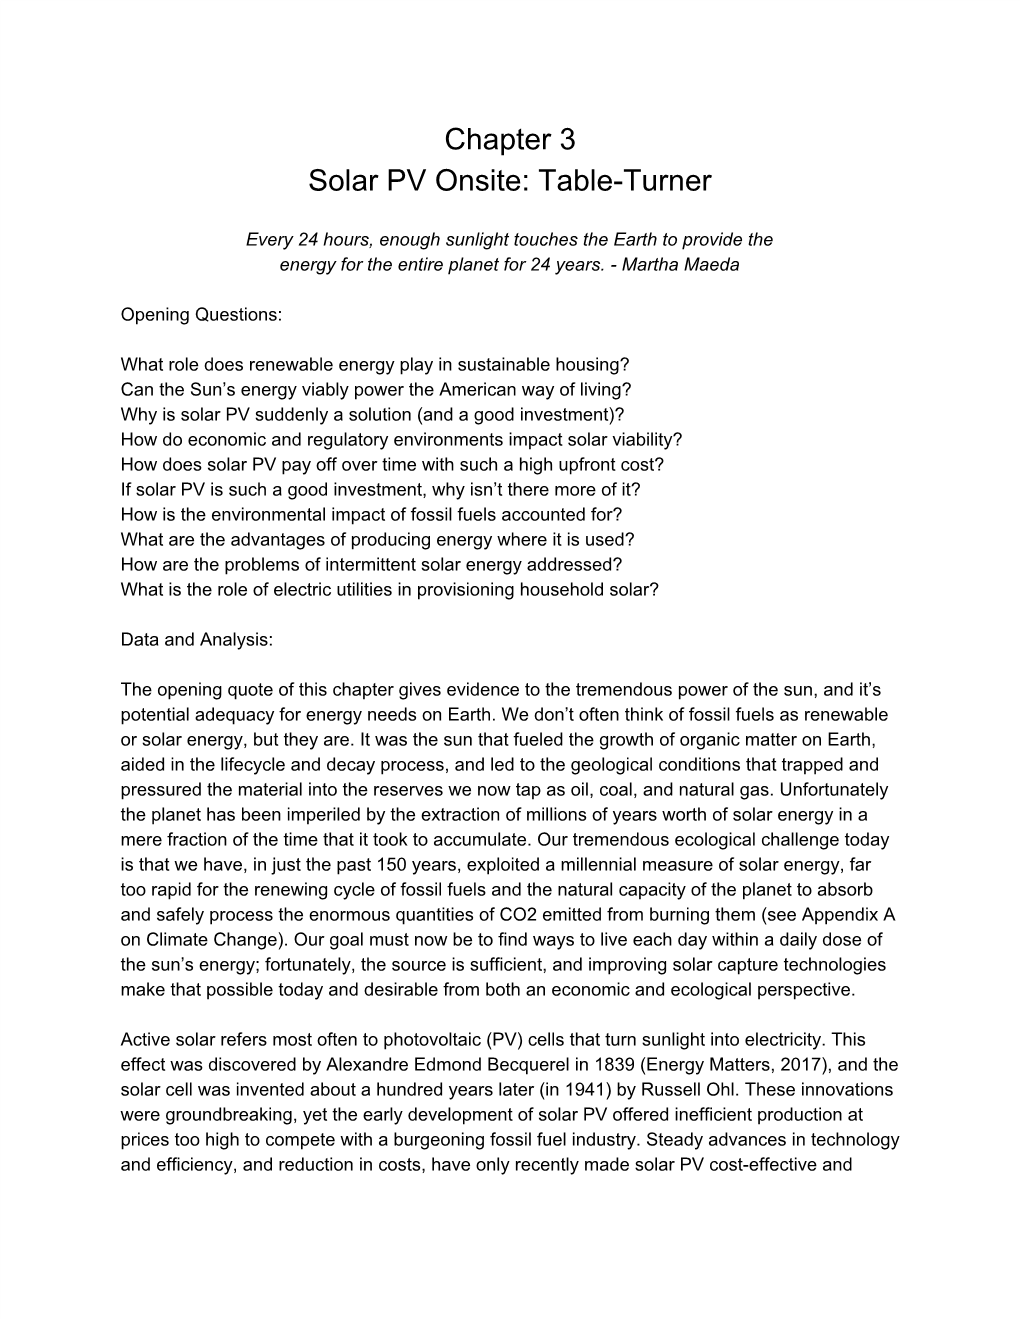 Chapter 3 Solar PV Onsite: Table-Turner